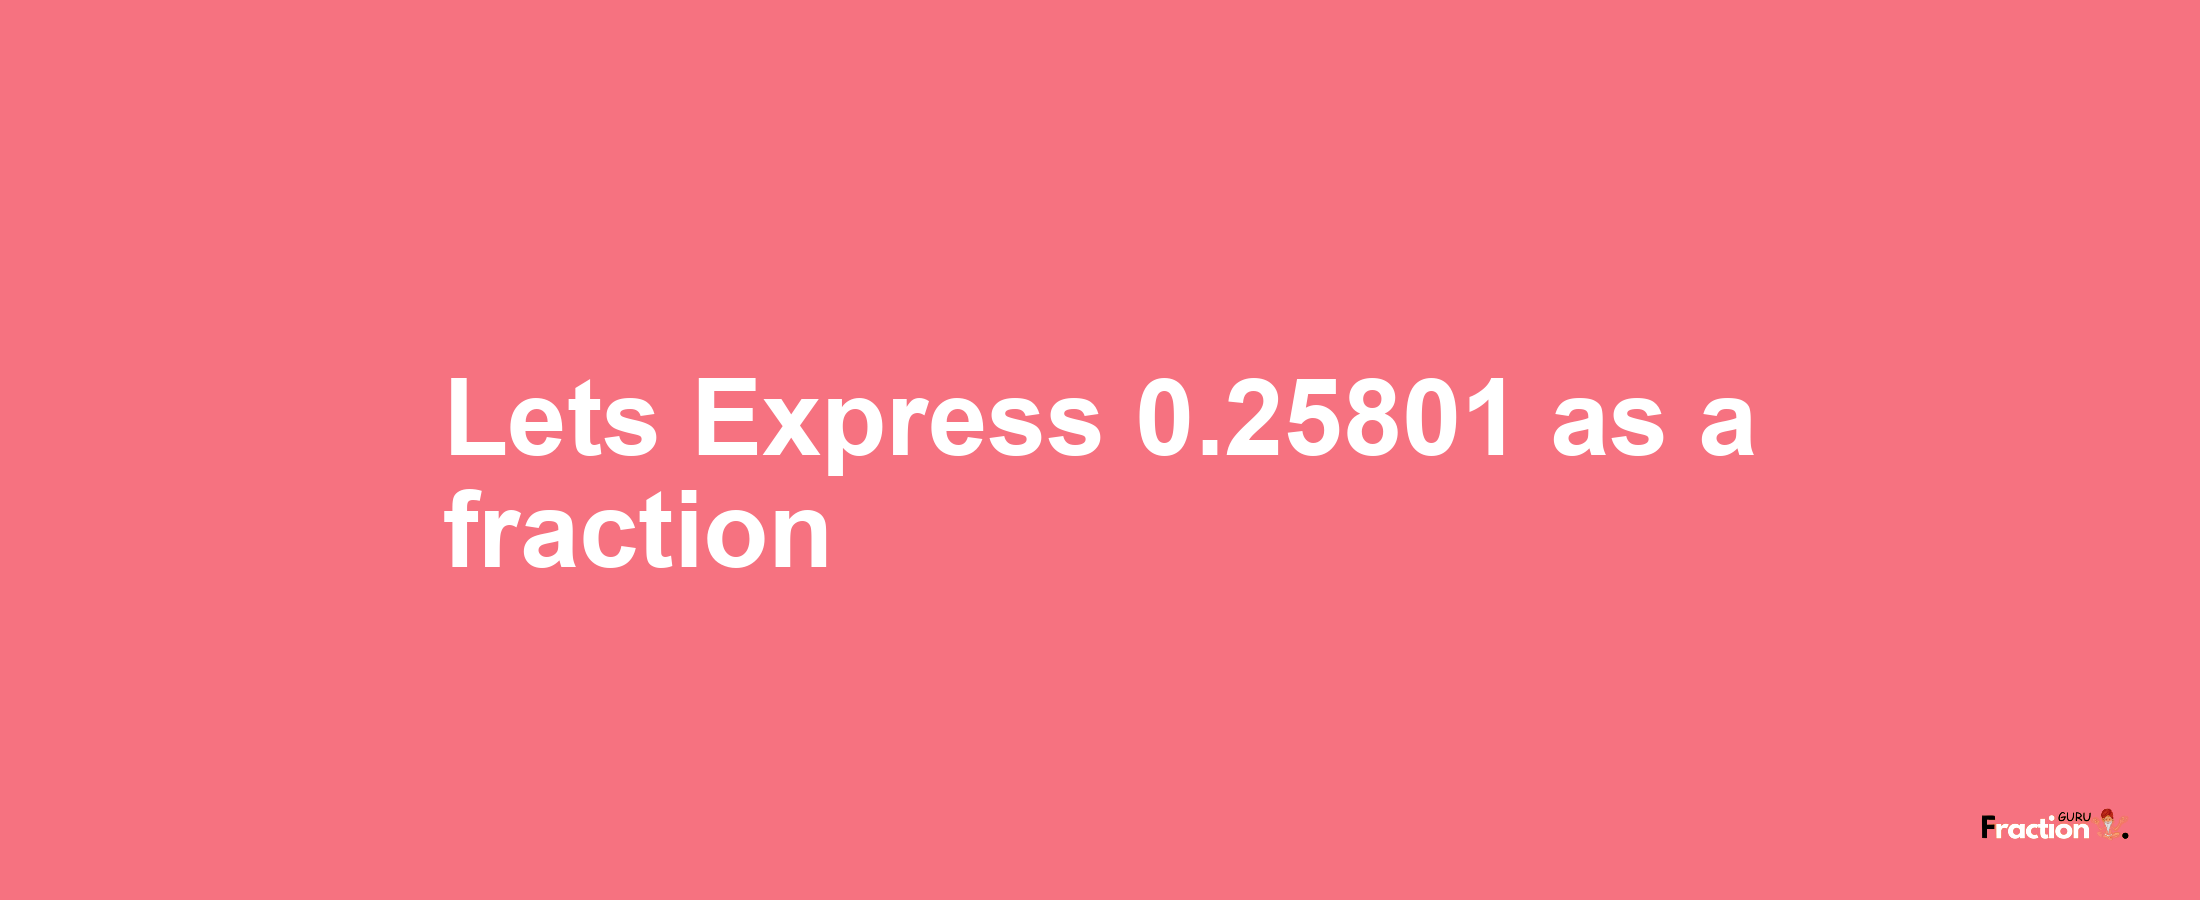 Lets Express 0.25801 as afraction